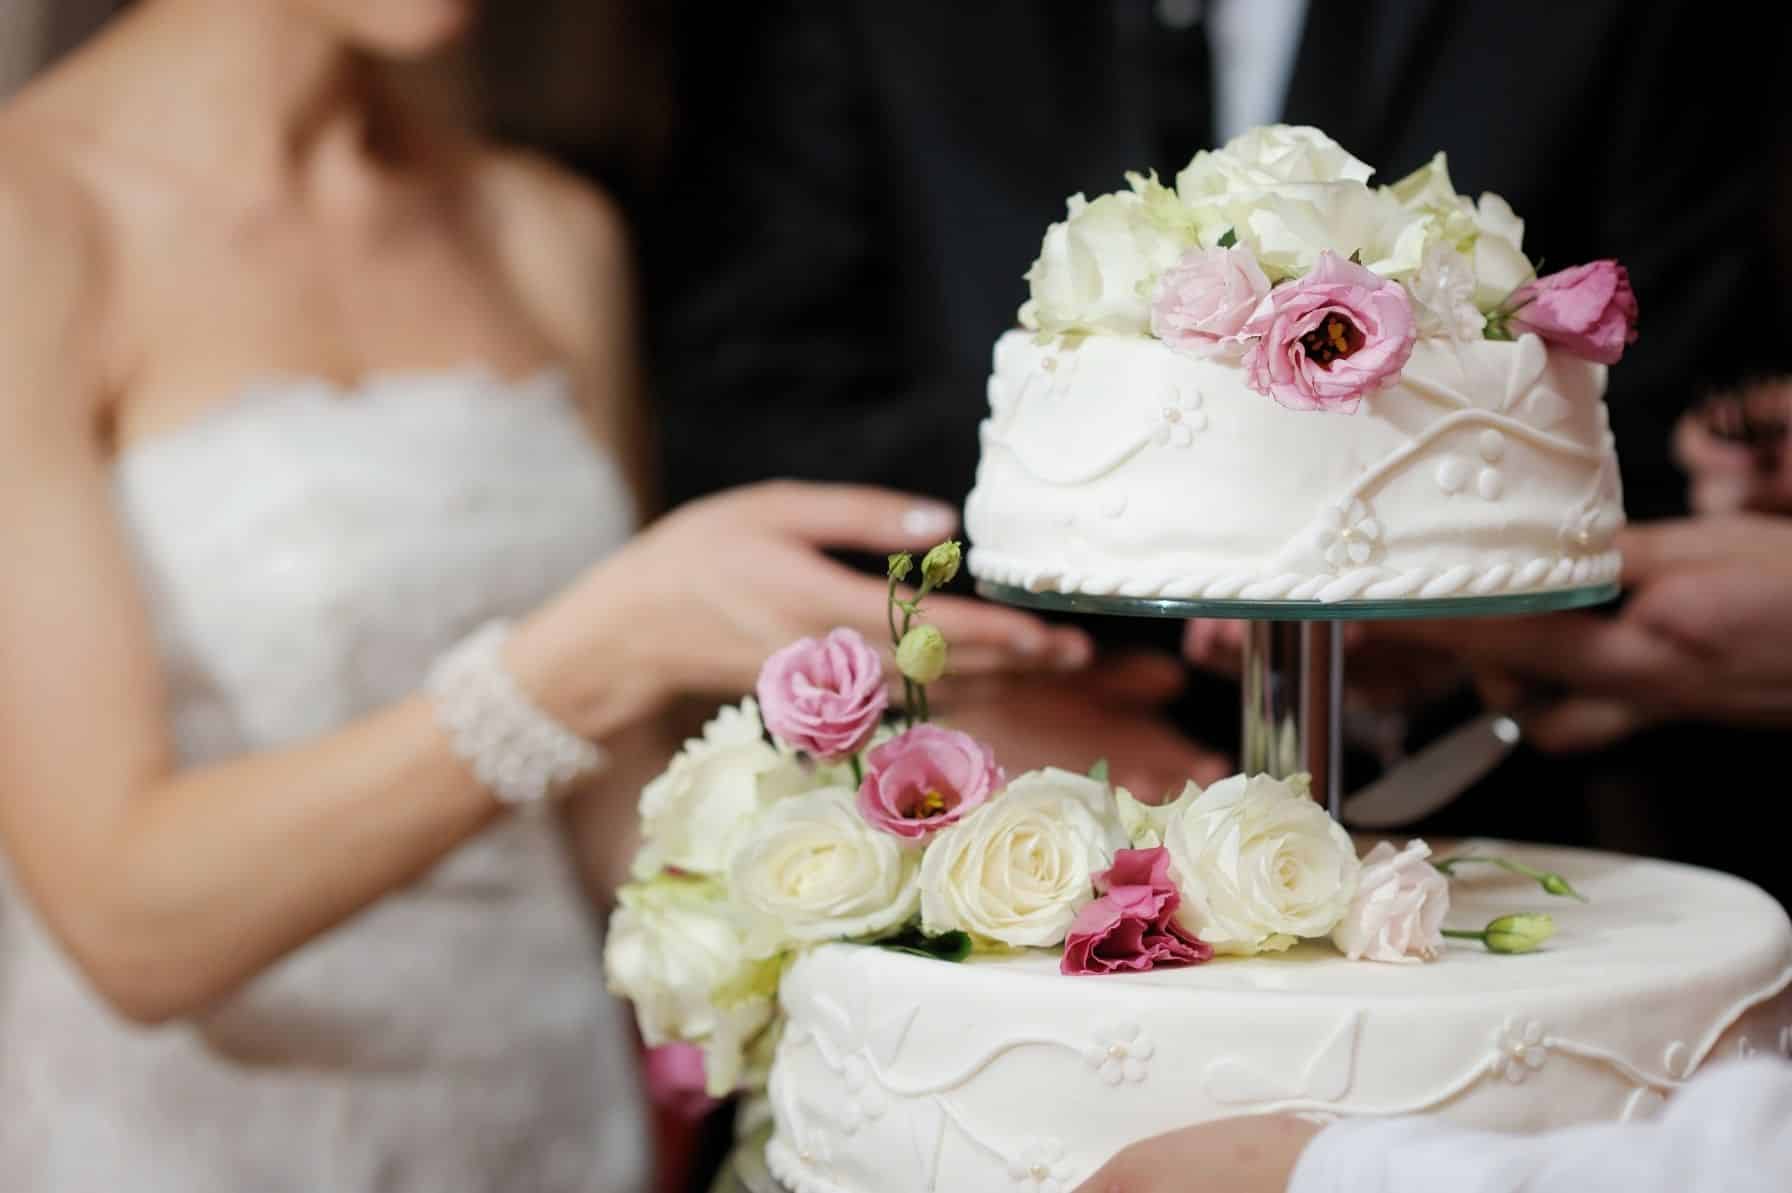 wedding cake cost with rose topping